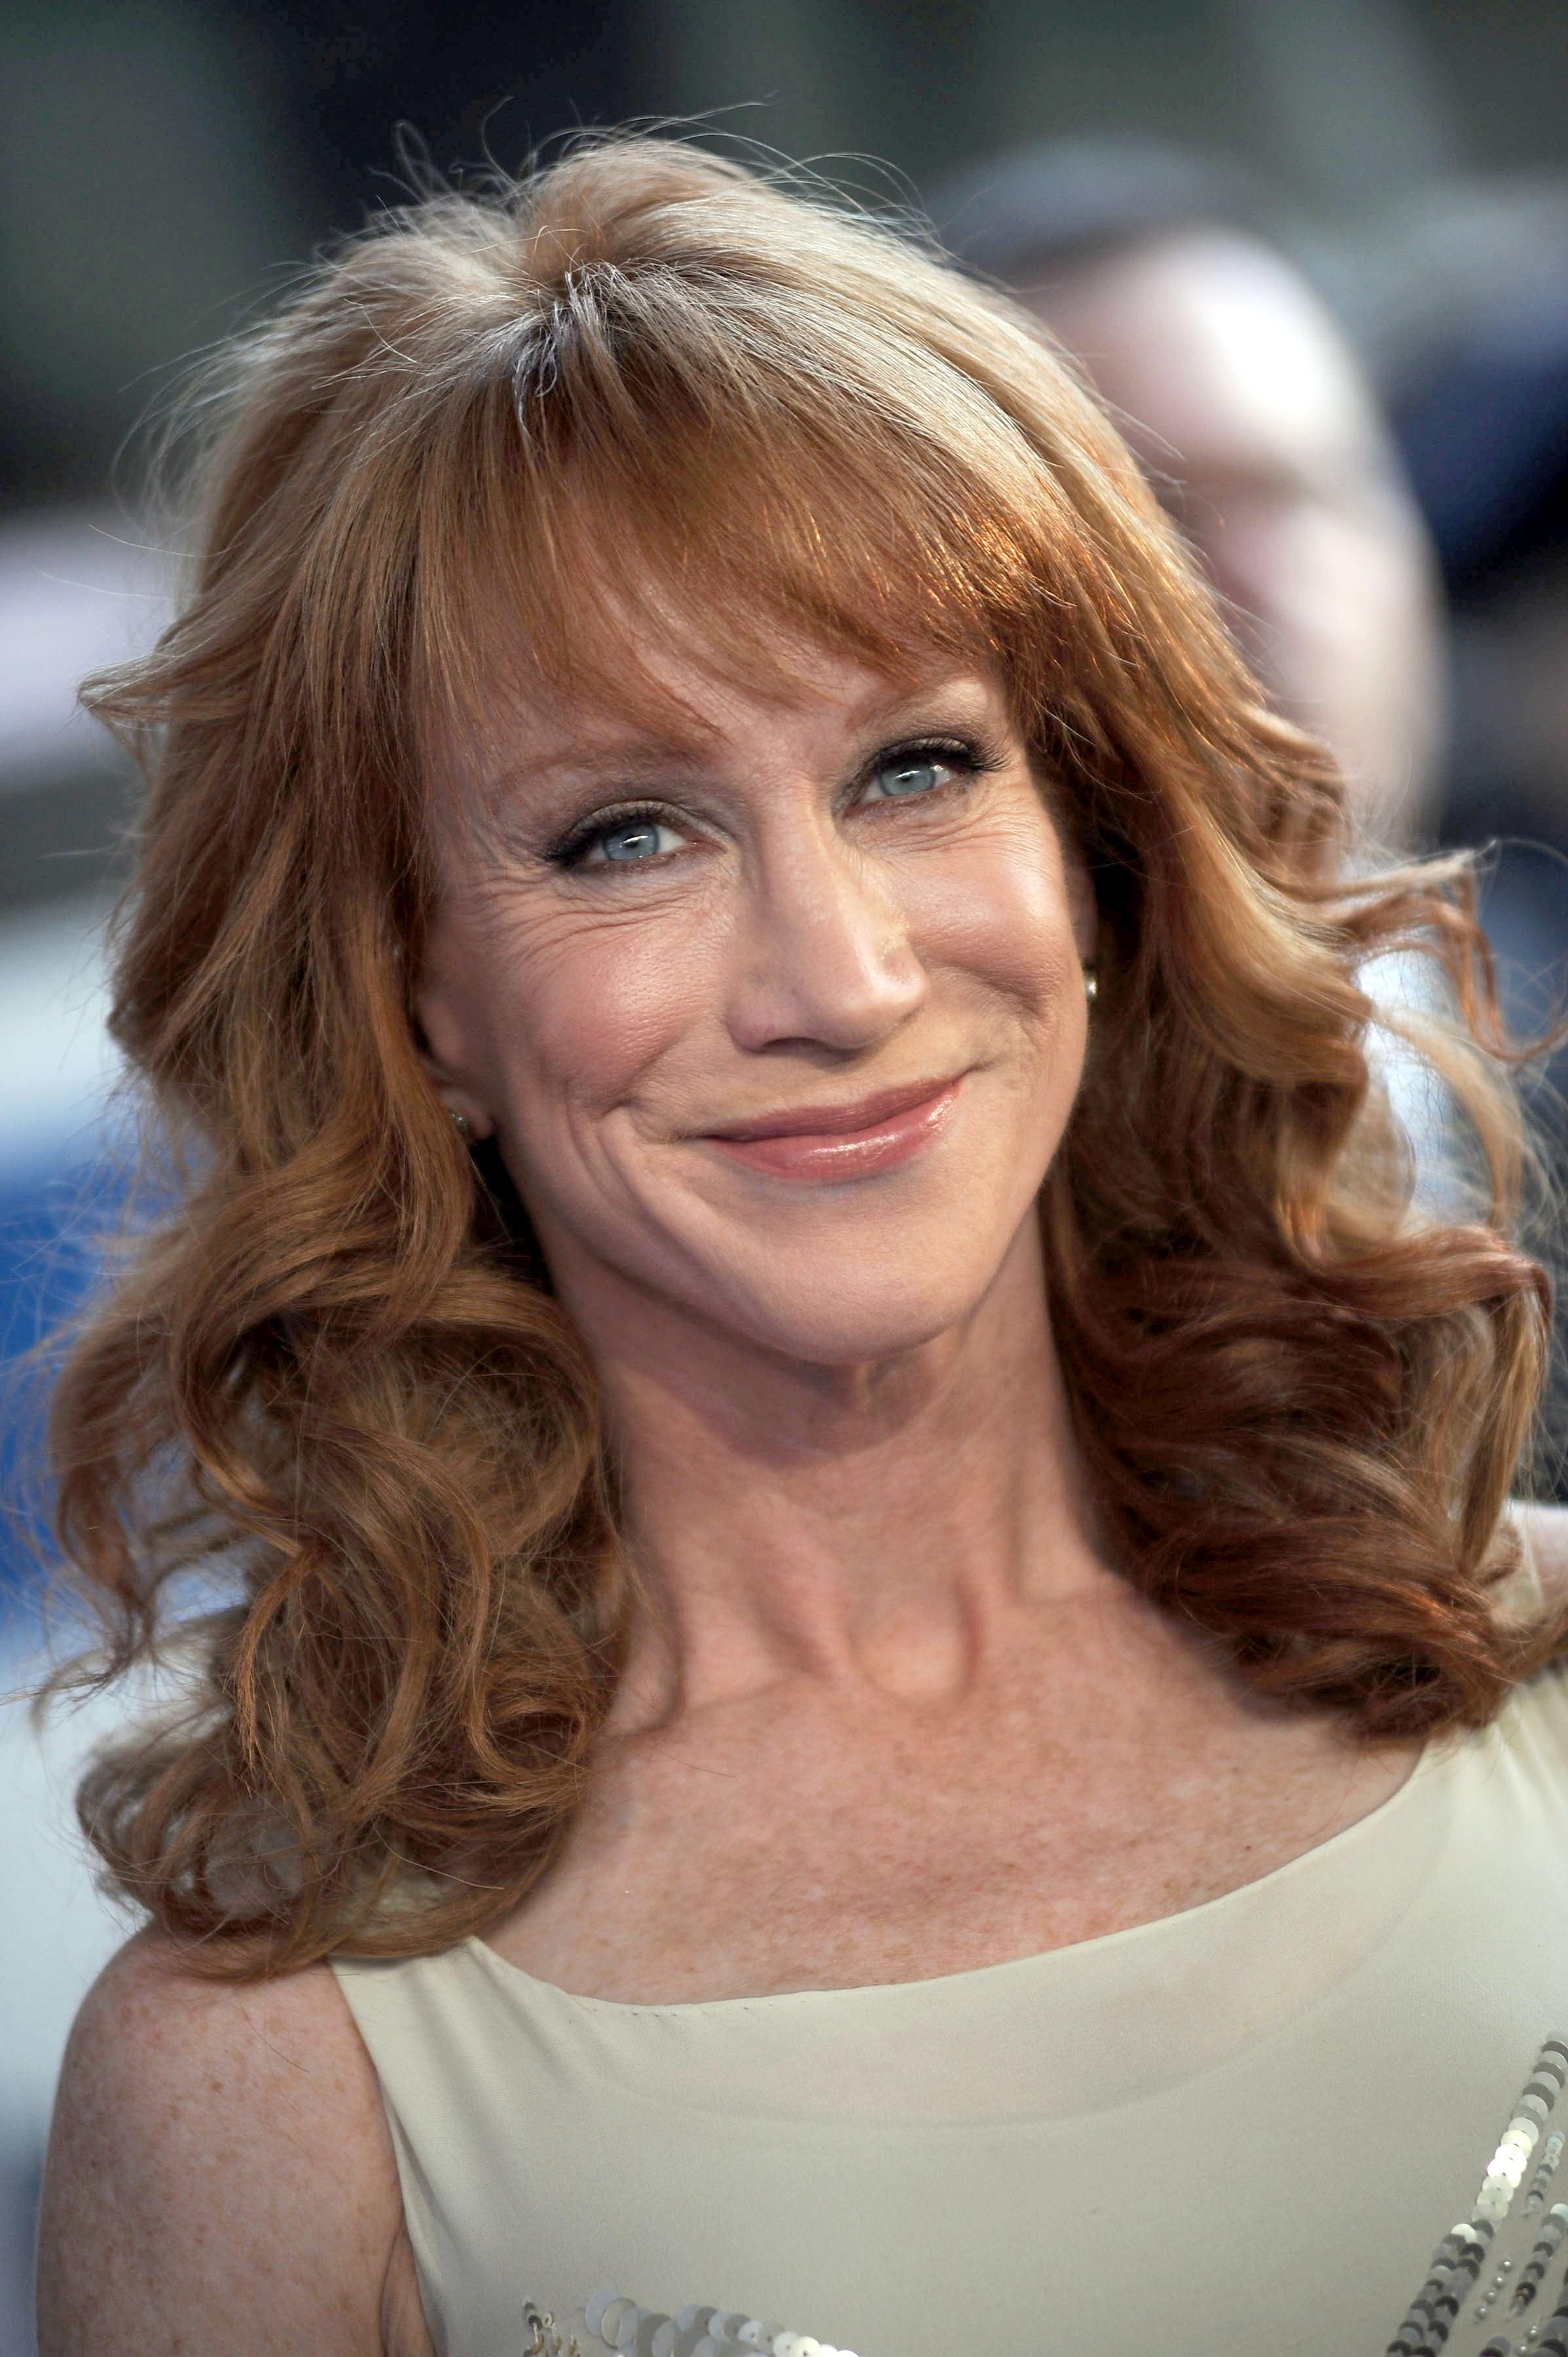 <p>These days, <a href="https://www.wonderwall.com/celebrity/profiles/overview/kathy-griffin-681.article">Kathy Griffin</a> (pictured in 2011) sports a less rounded face and more pronounced features. And she'll gladly tell you all about it. She's openly discussed her head-to-toe transformation in her stand-up routines, on her reality show and in her book. And that, at least, is a refreshing change from the typical celeb mindset of "If I don't admit I had plastic surgery, no one will know."</p>